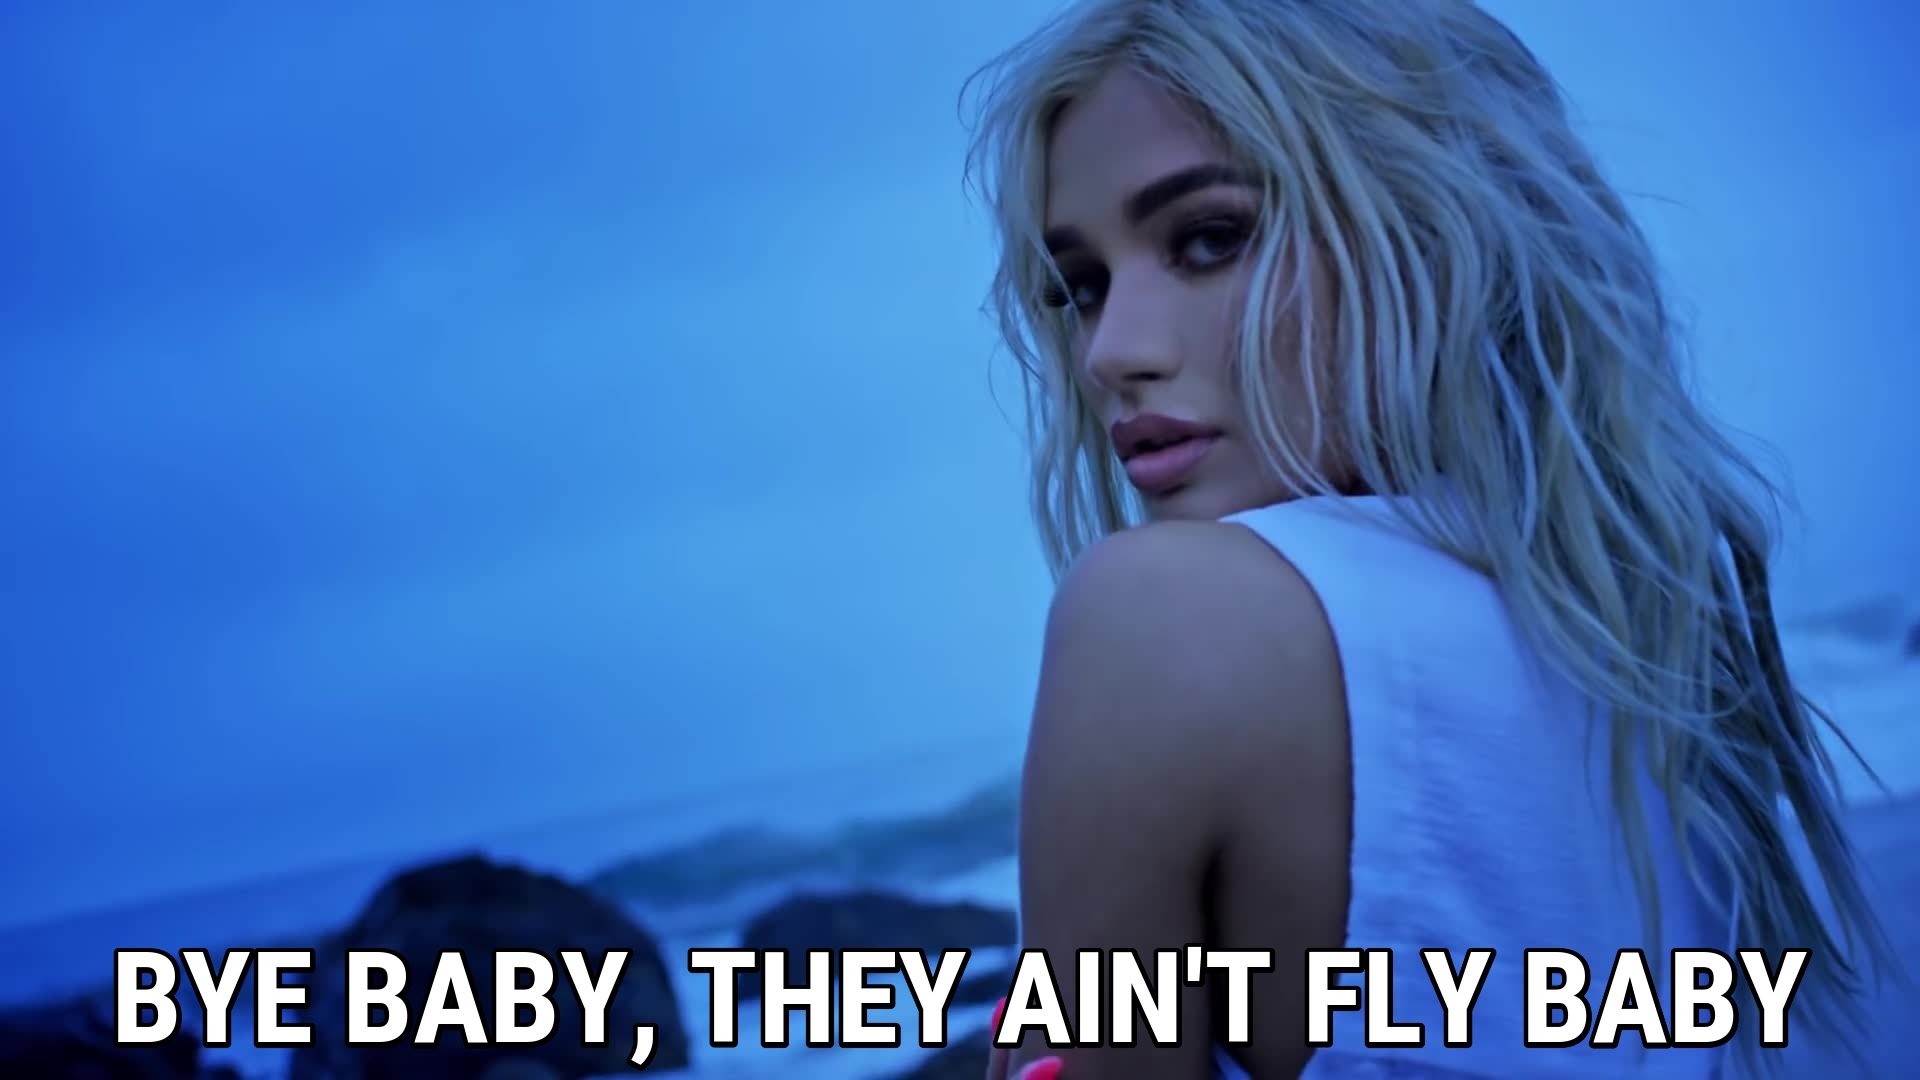 1920x1080 Bye baby, they ain't fly baby